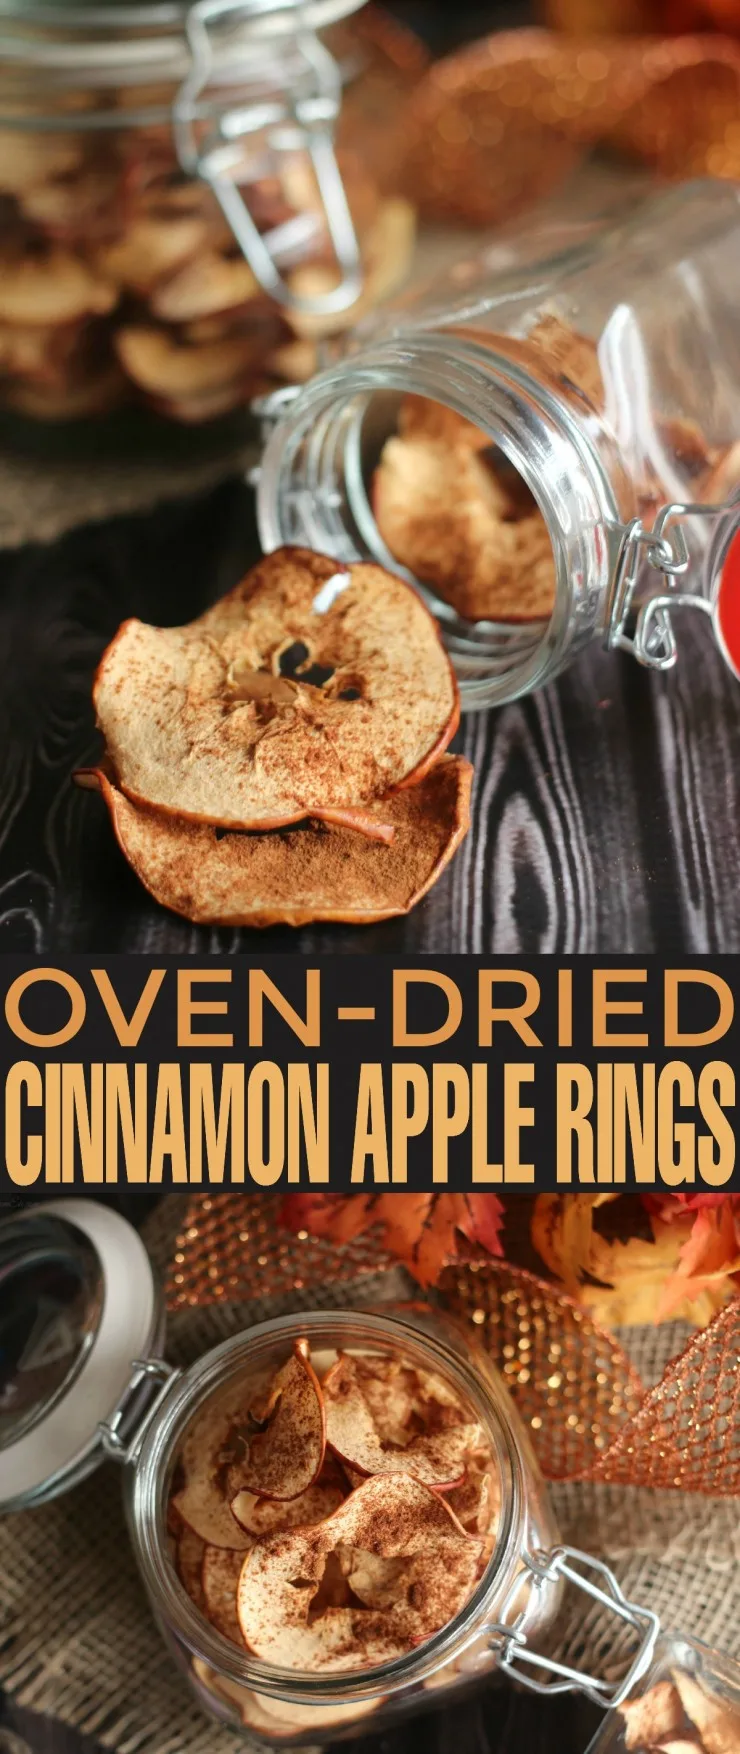 Homemade Oven-Dried Cinnamon Apple Rings. A delicious, healthy and easy to make snack with all those autumn apples!